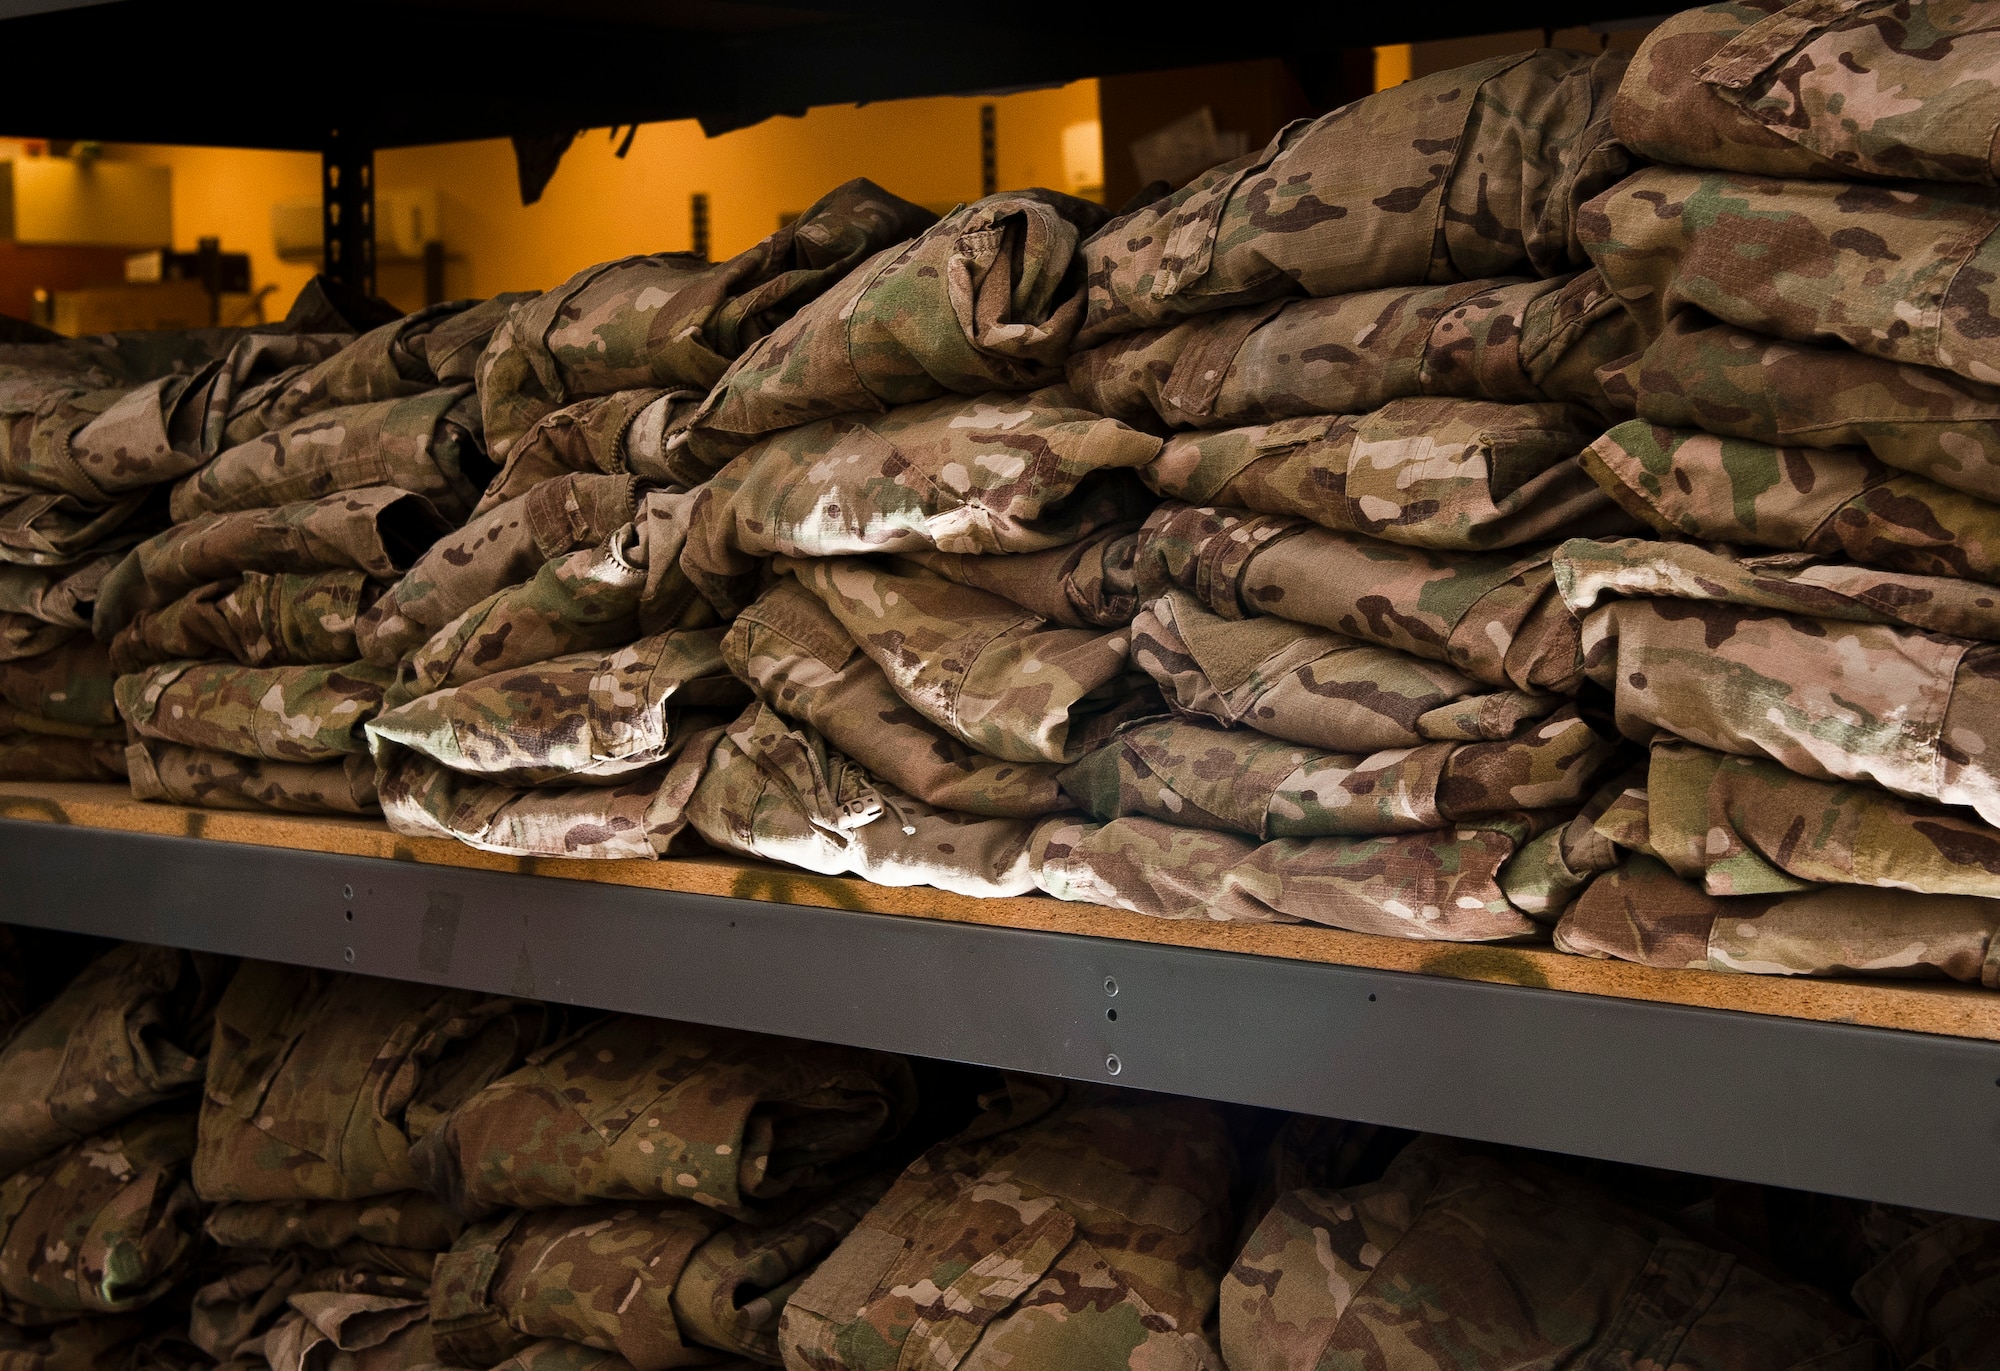 Stacks of recycled Operation Enduring Freedom Camouflage Pattern uniforms await Airmen at Bagram Airfield, Afghanistan, July 7, 2012. The uniform has become the iconic attire of coalition forces in Afghanistan for many reasons. They’re lightweight, flame retardant, and well suited to blend with Afghanistan’s terrain. (U.S. Air Force photo/Capt. Raymond Geoffroy)